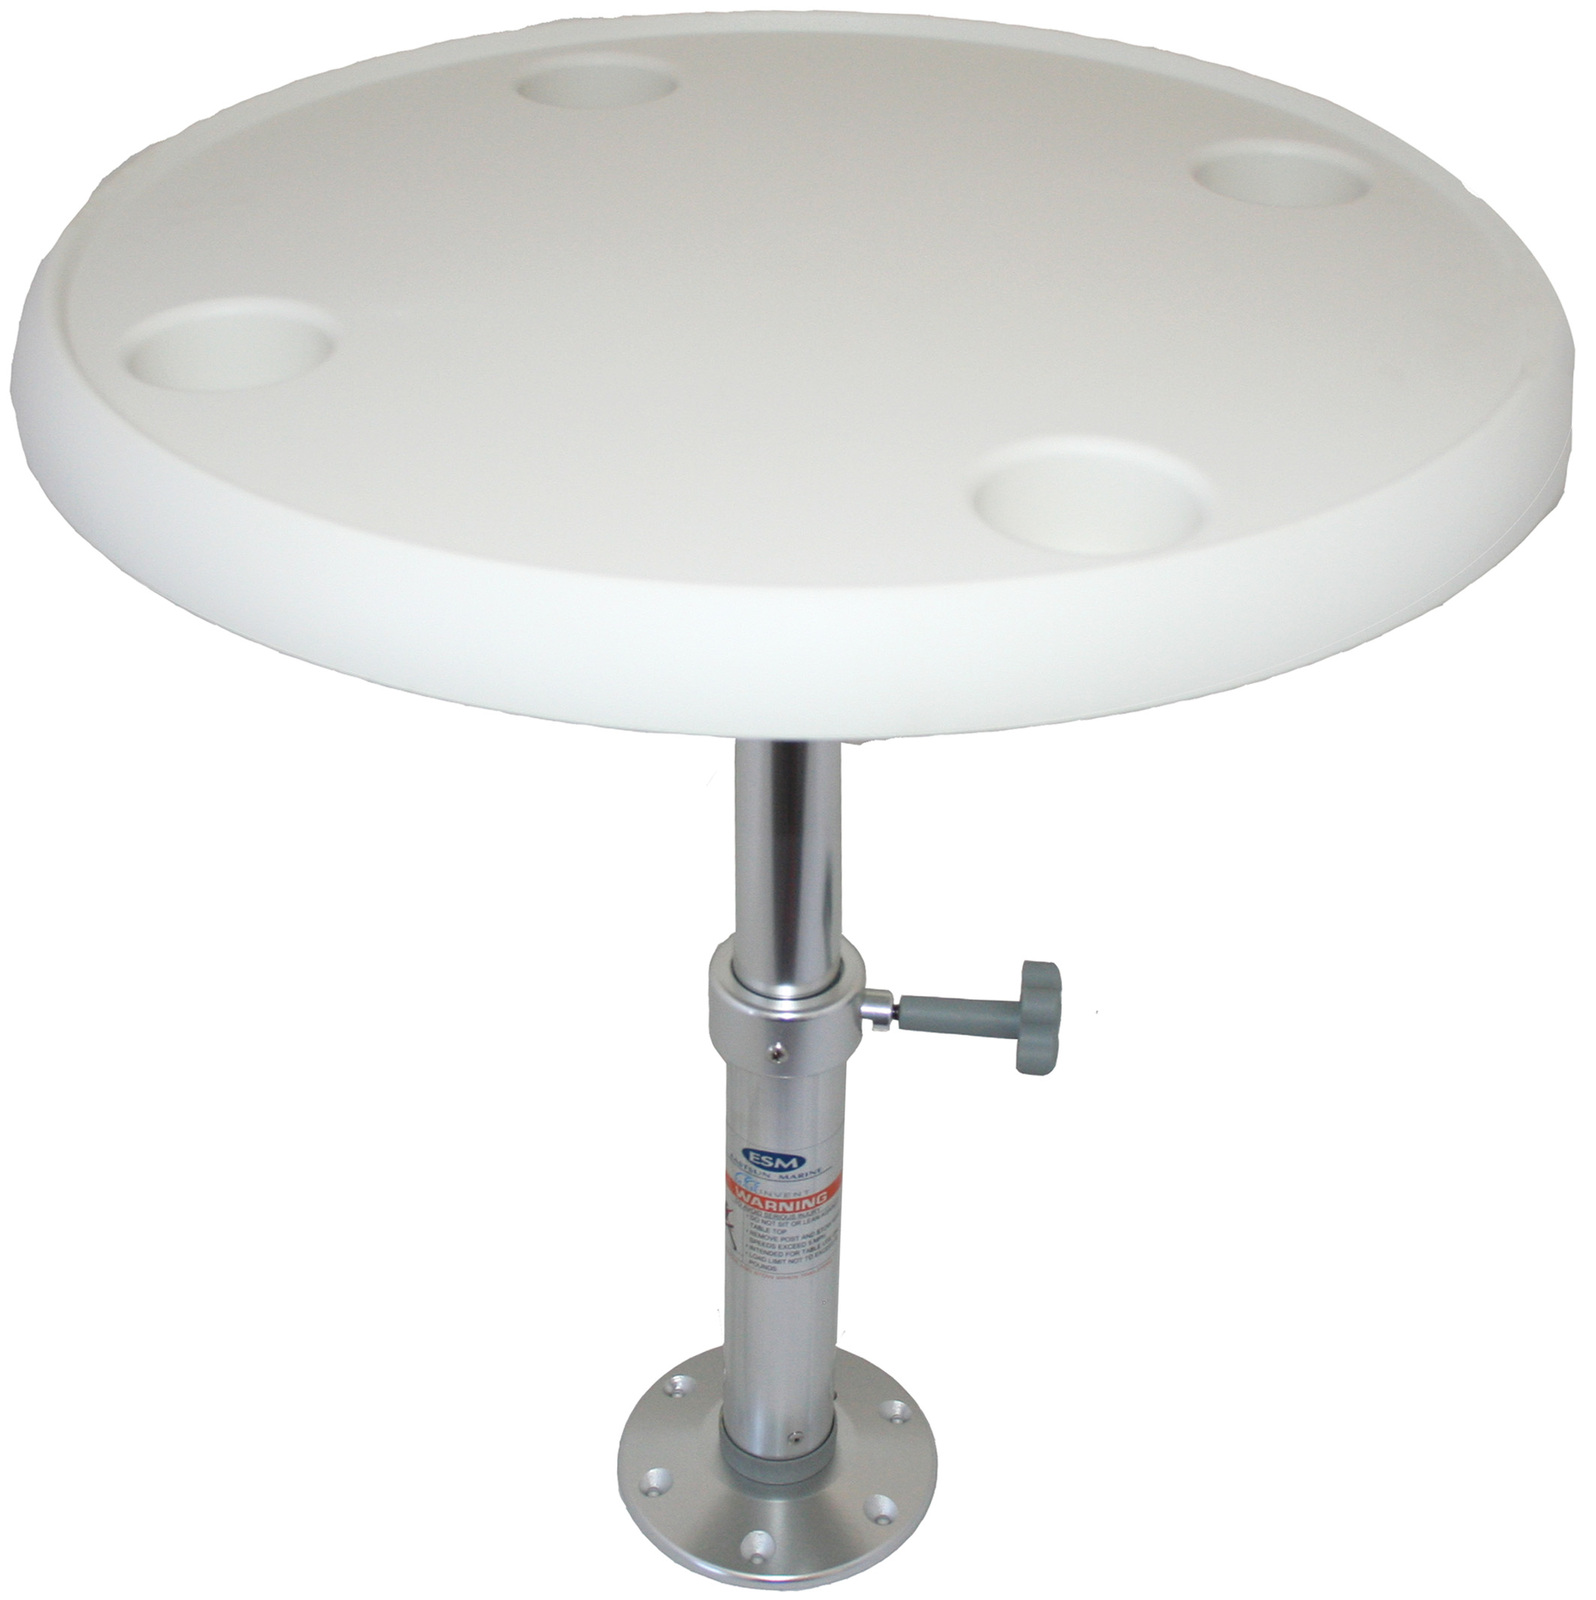 Table - Round with Adjustable Pedestal